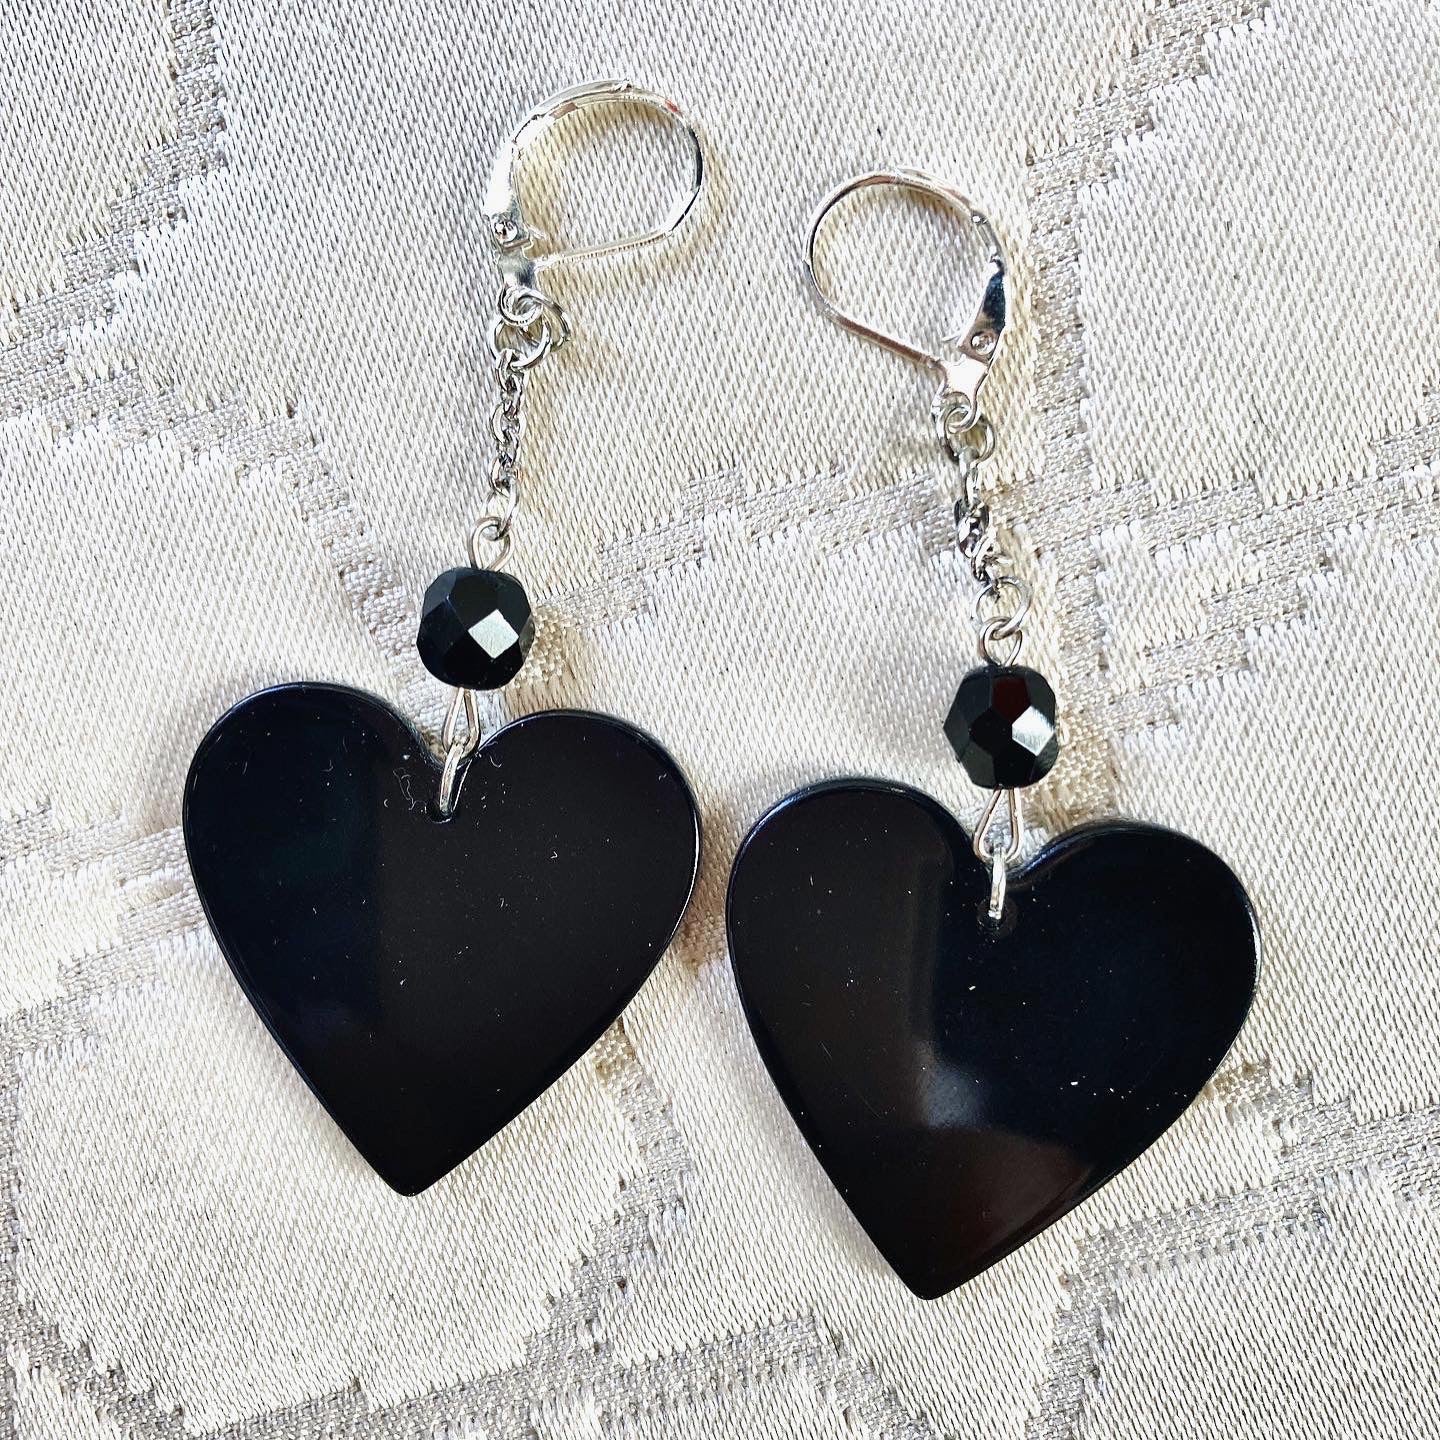 Black Heart Earrings with Chain and Glass Jet Bead